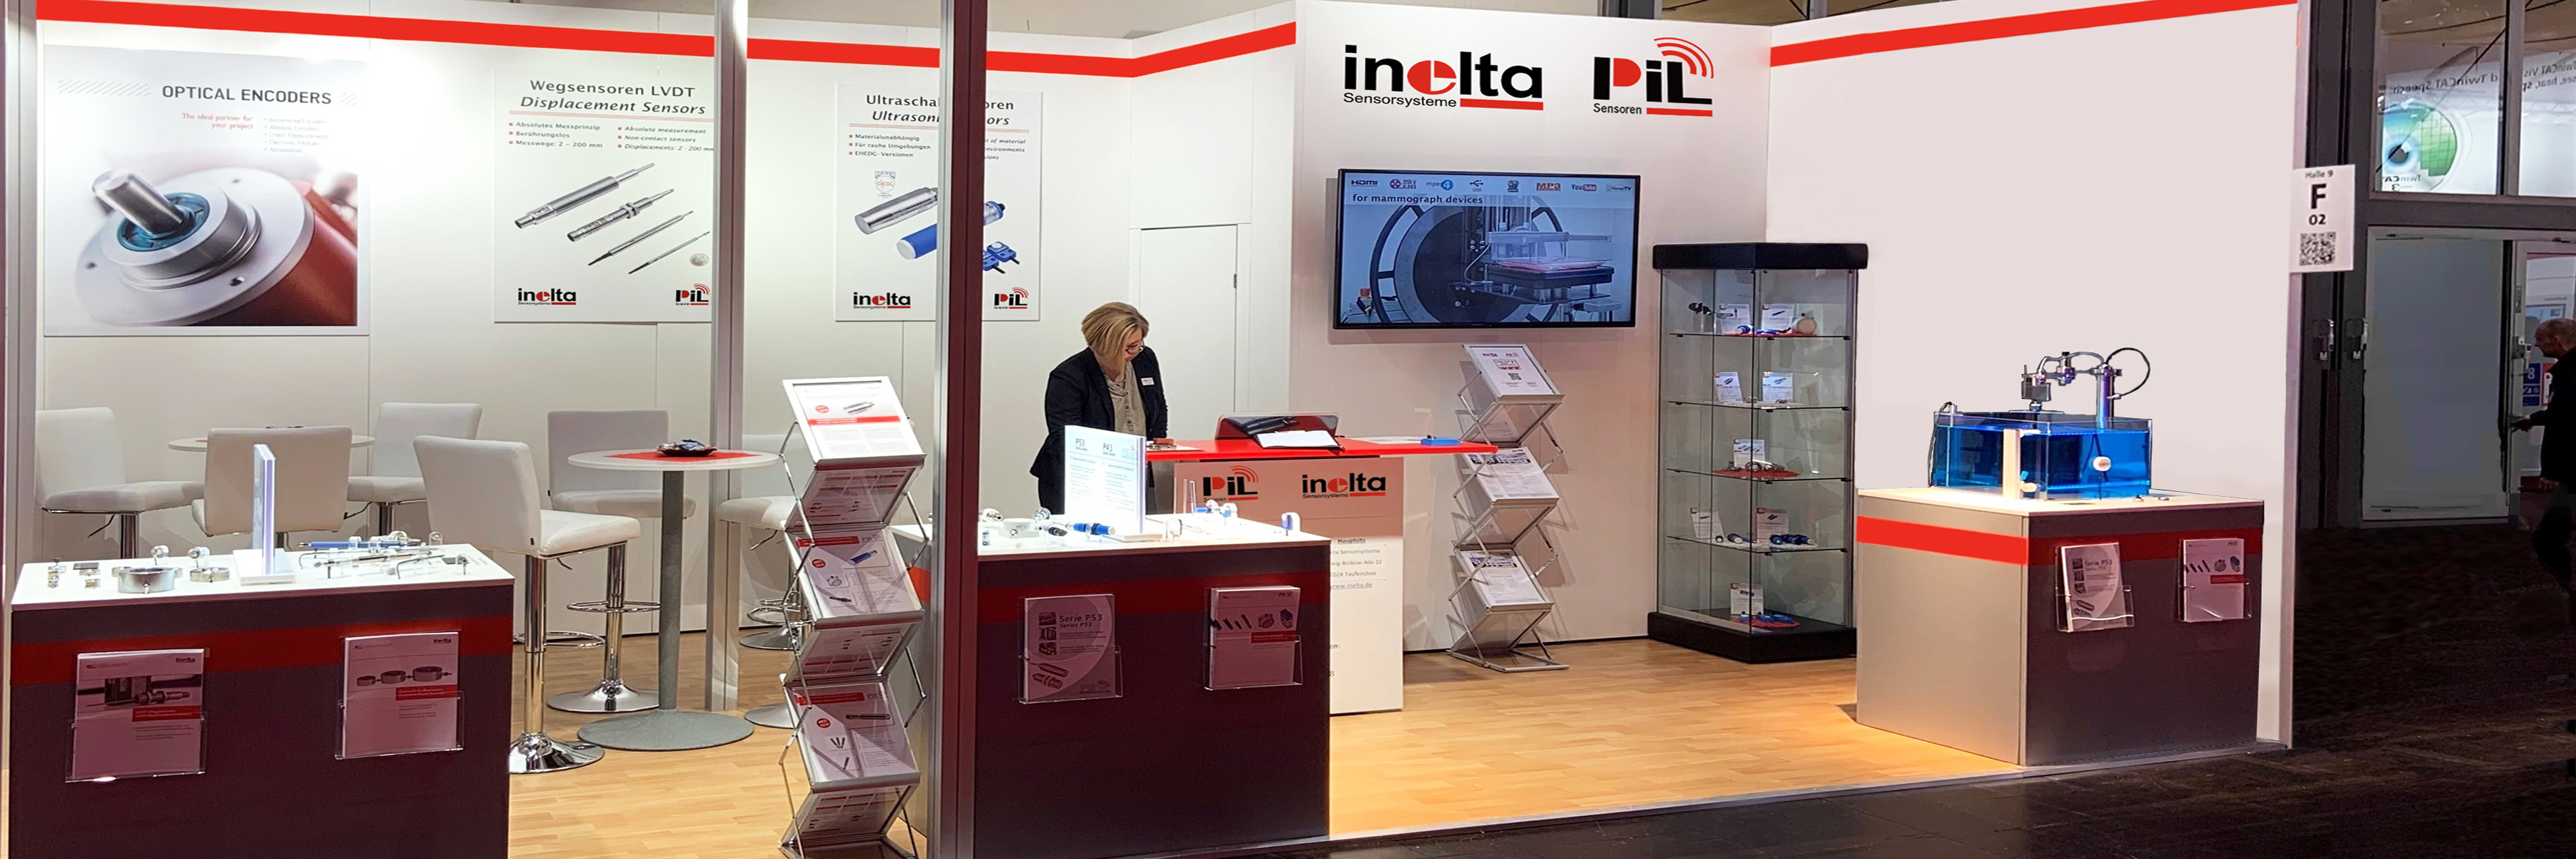 Exhibition booth Inelta and PIL